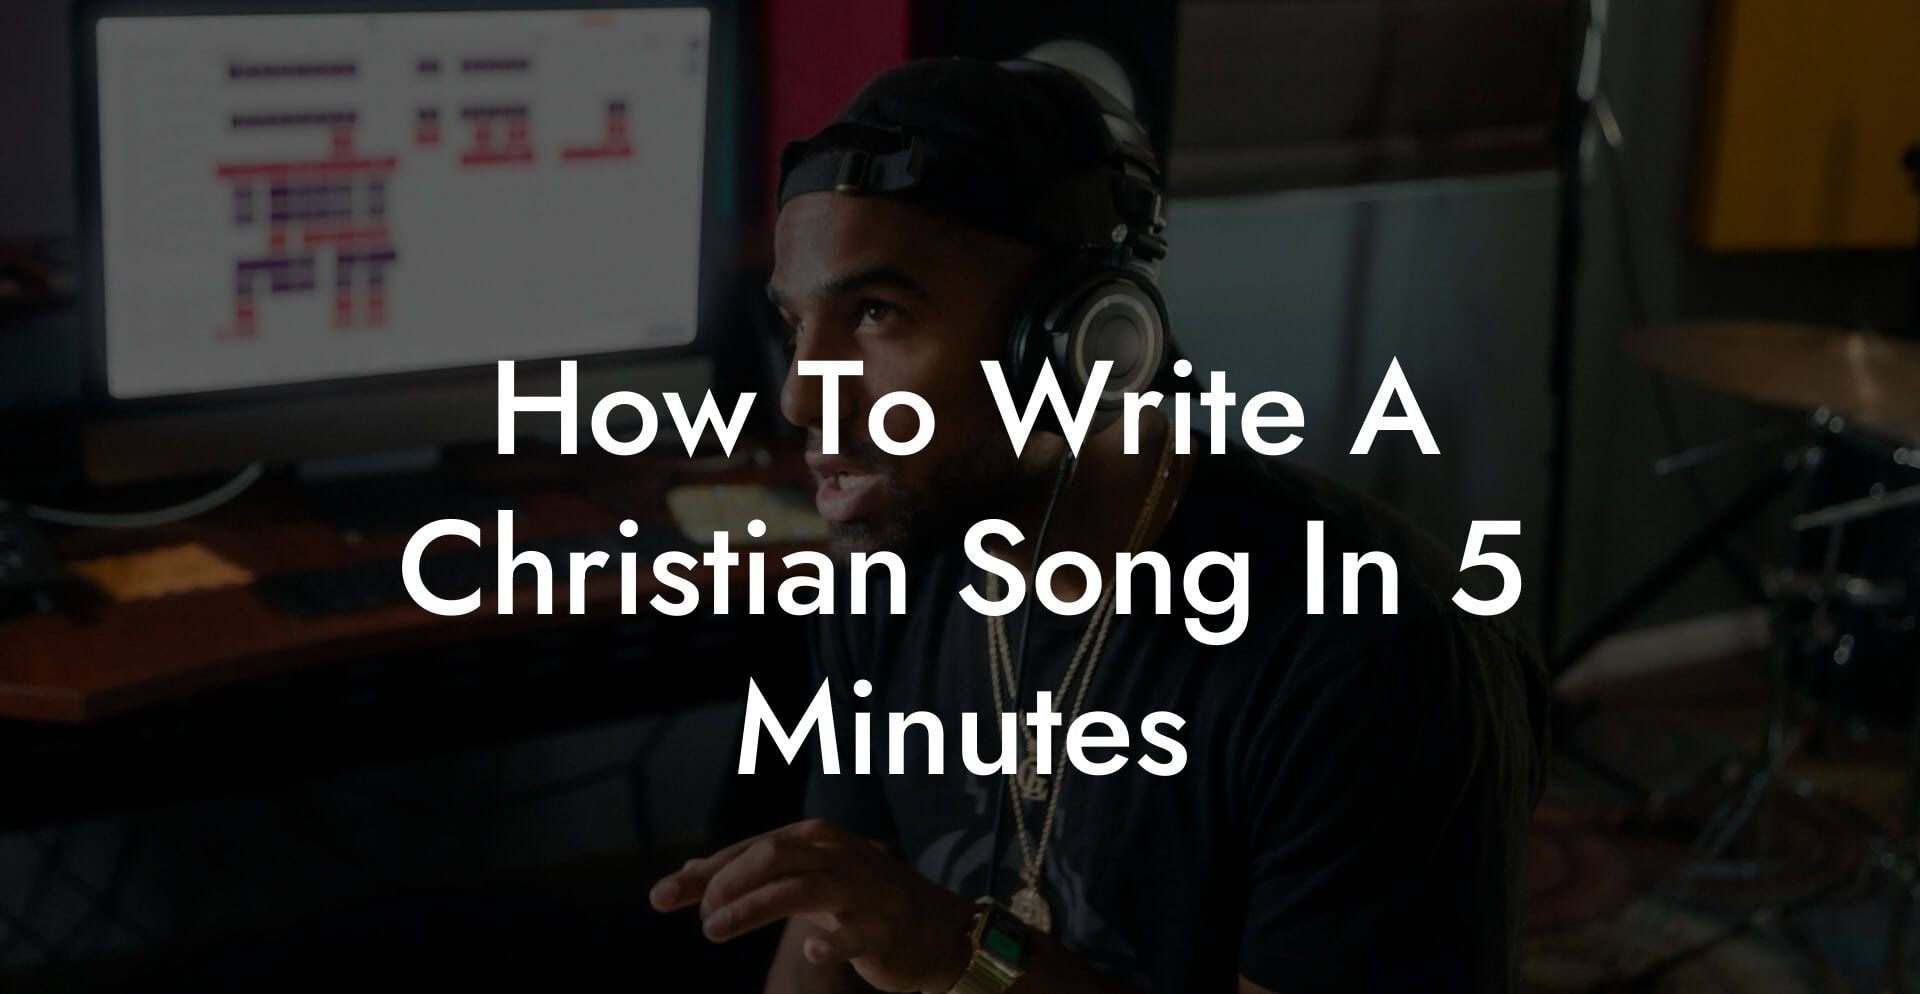 how to write a christian song in 5 minutes lyric assistant